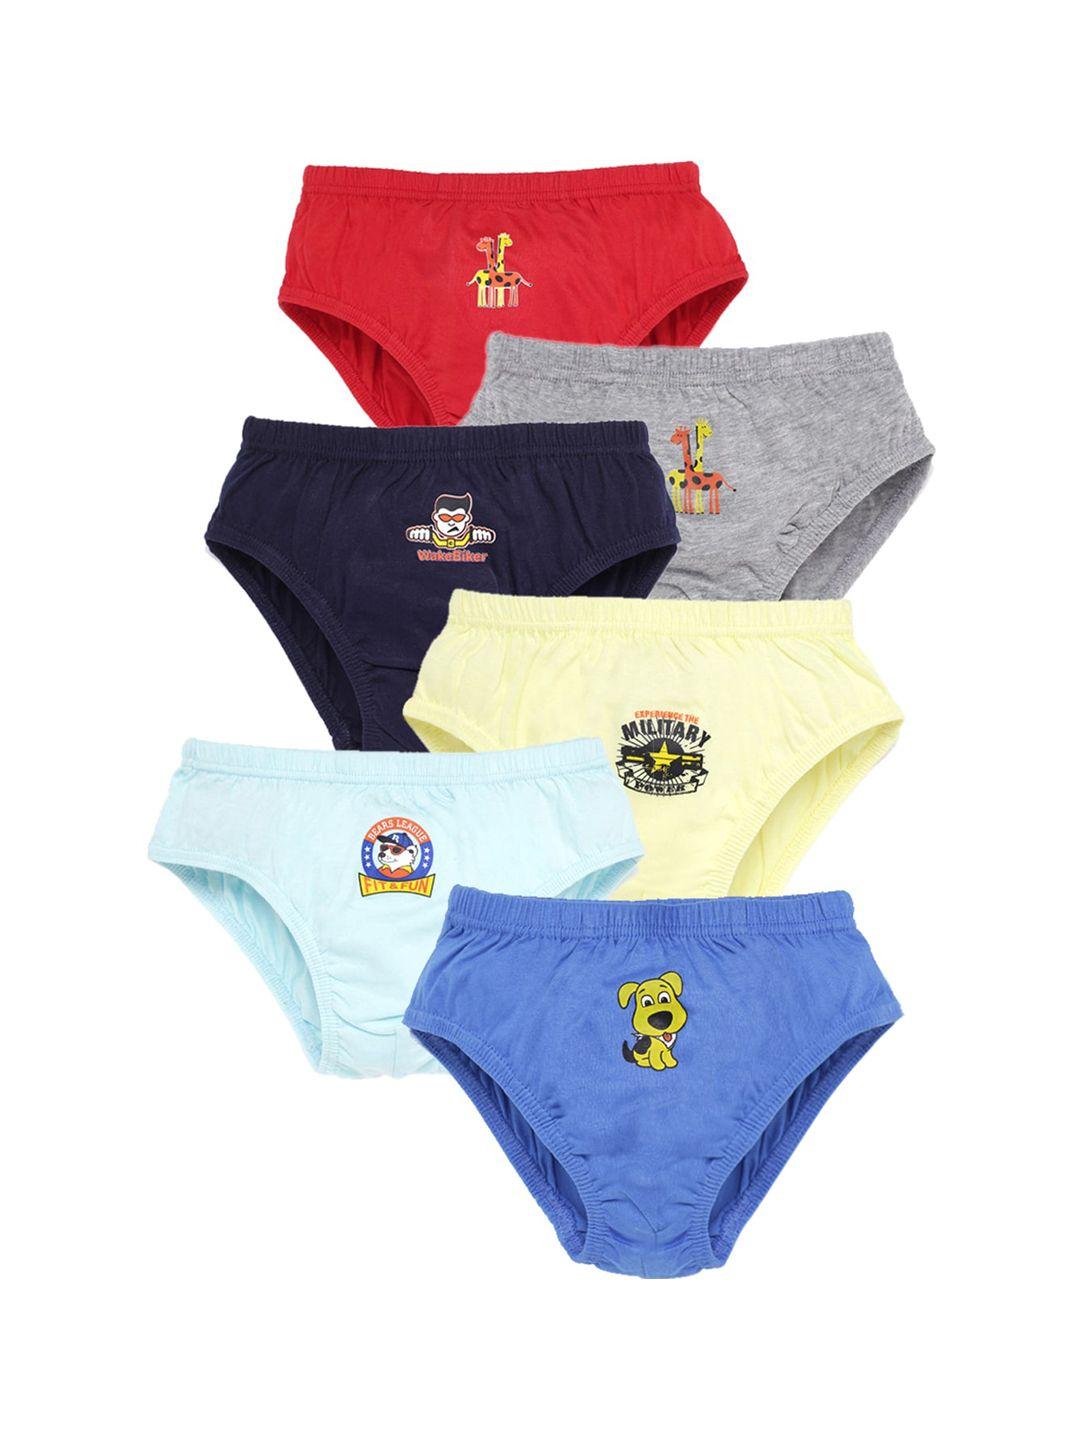 savage-boys-pack-of-6-multicolored-printed-cotton-basic-briefs-svg-boy-inel-undrw-55cm